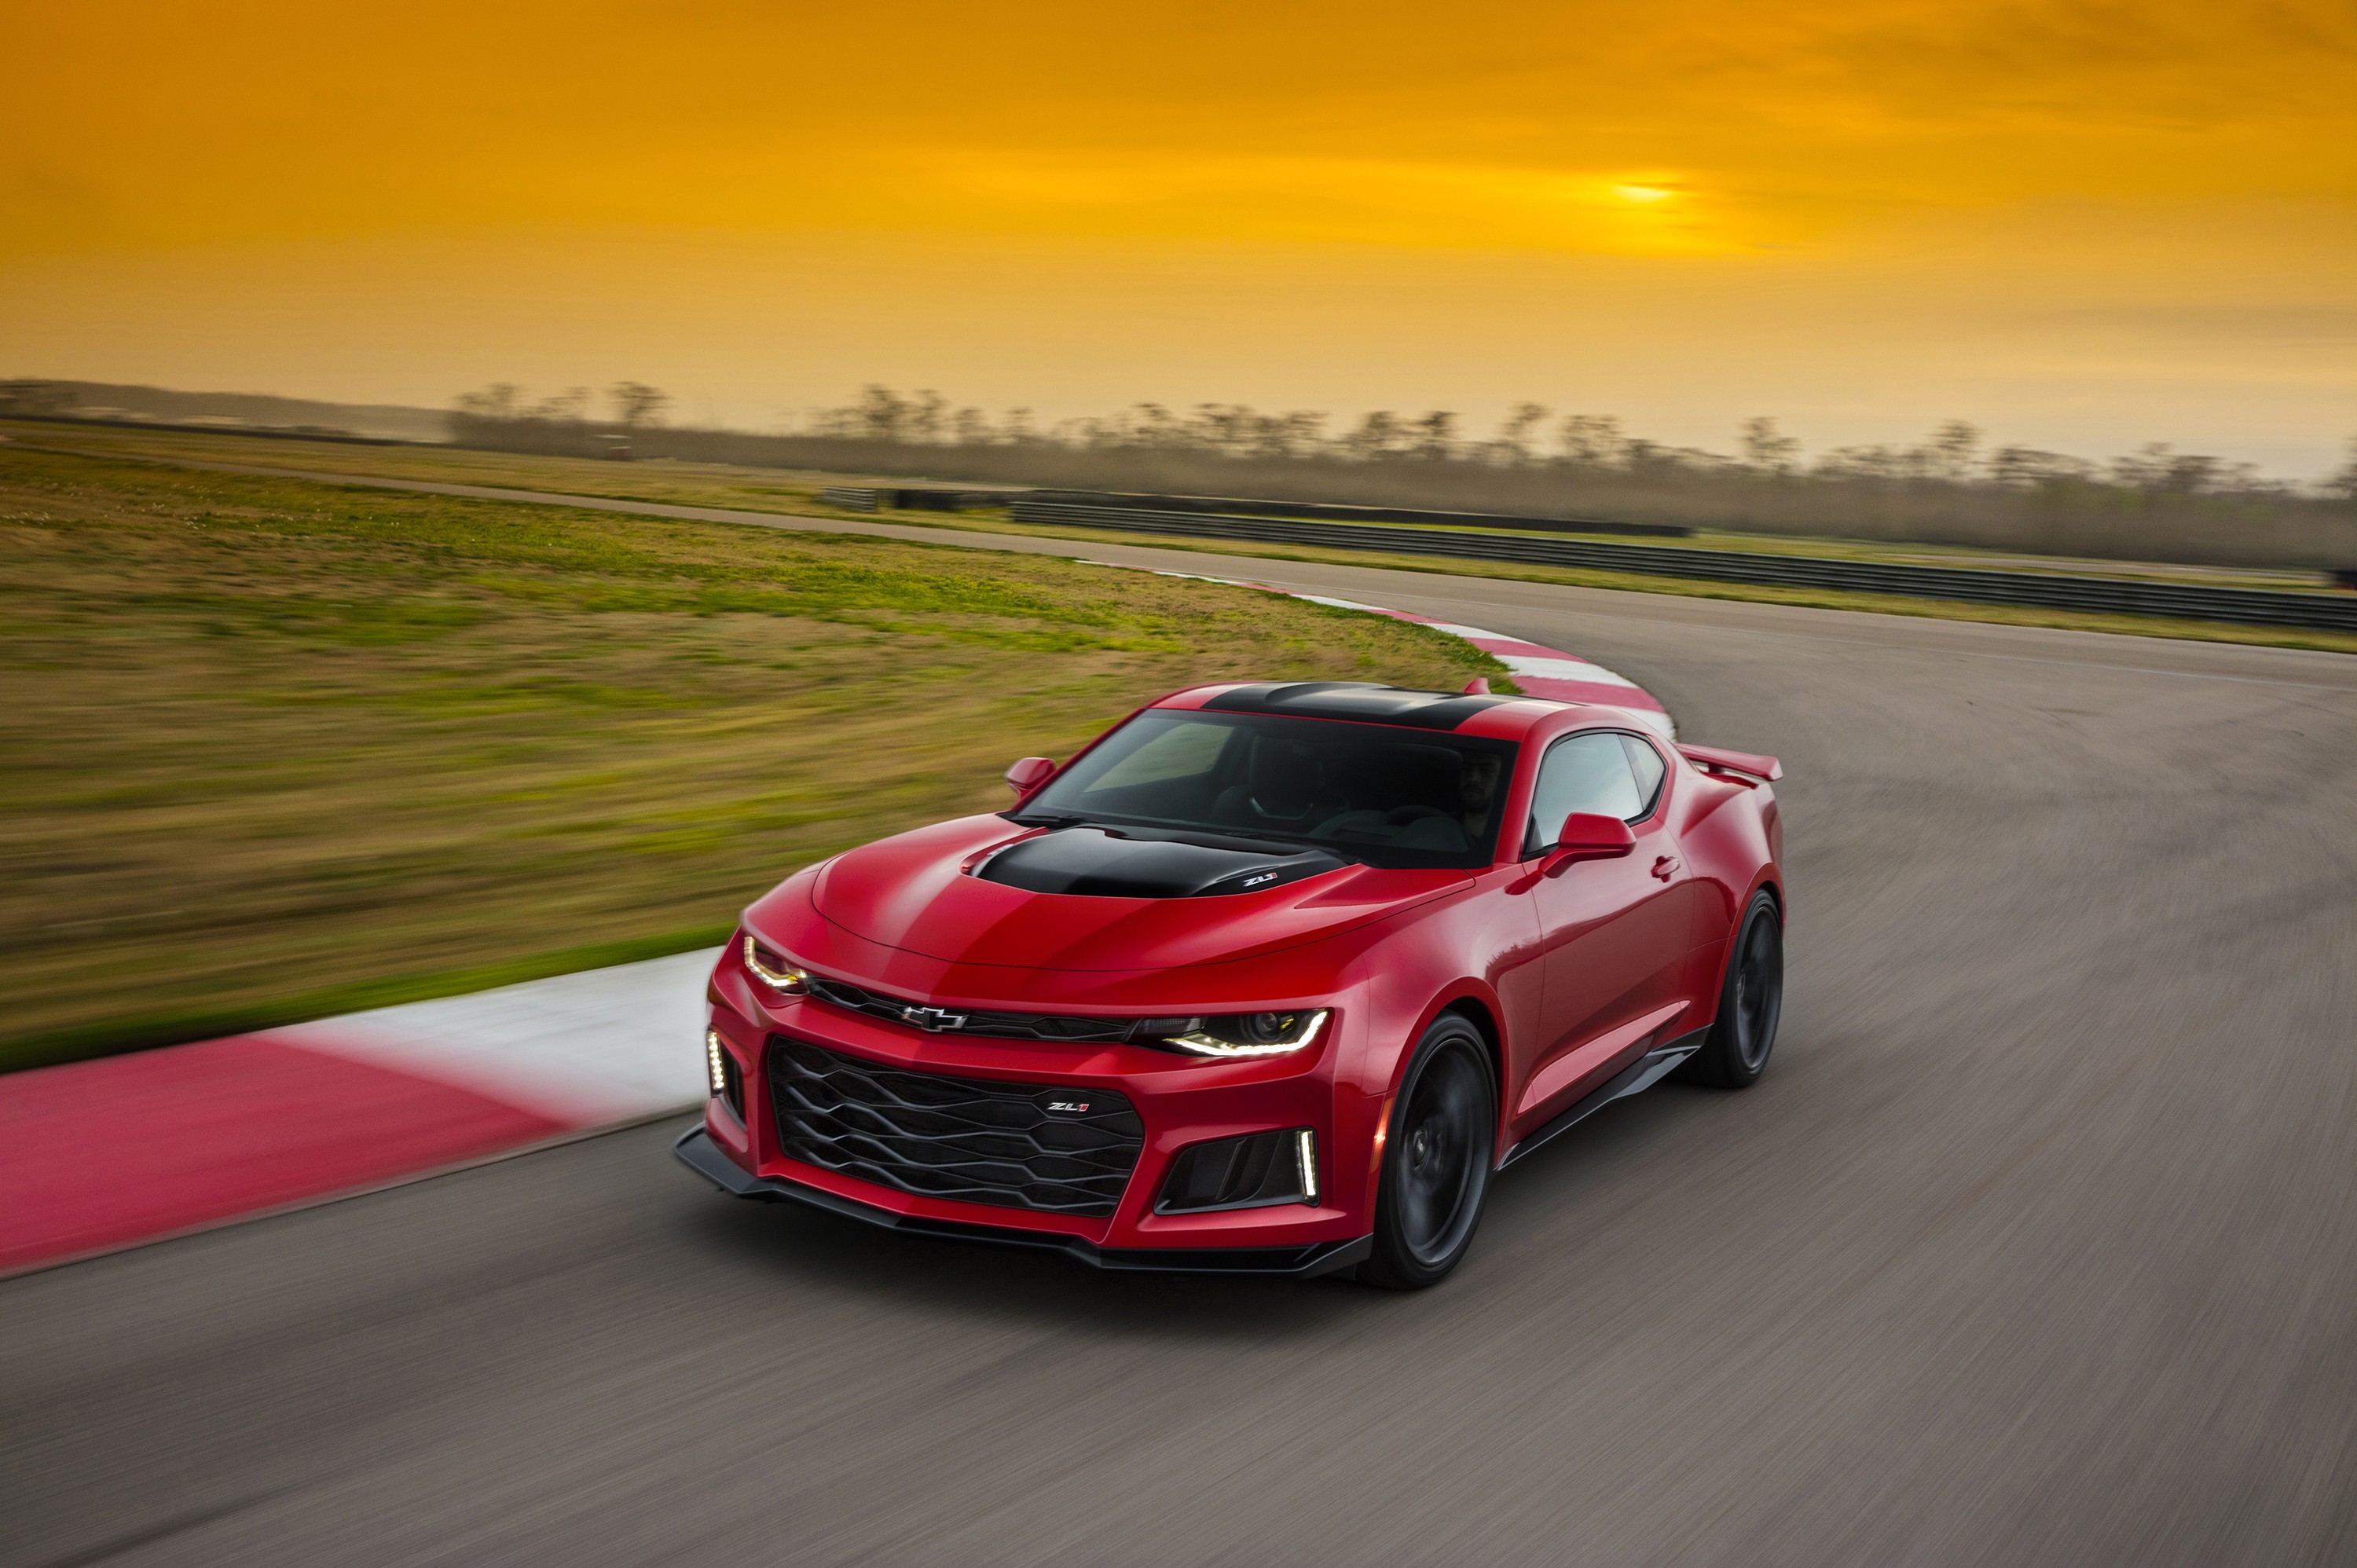 Chevrolet Camaro X Rendering Is Coupe SUV Done Right - autoevolution